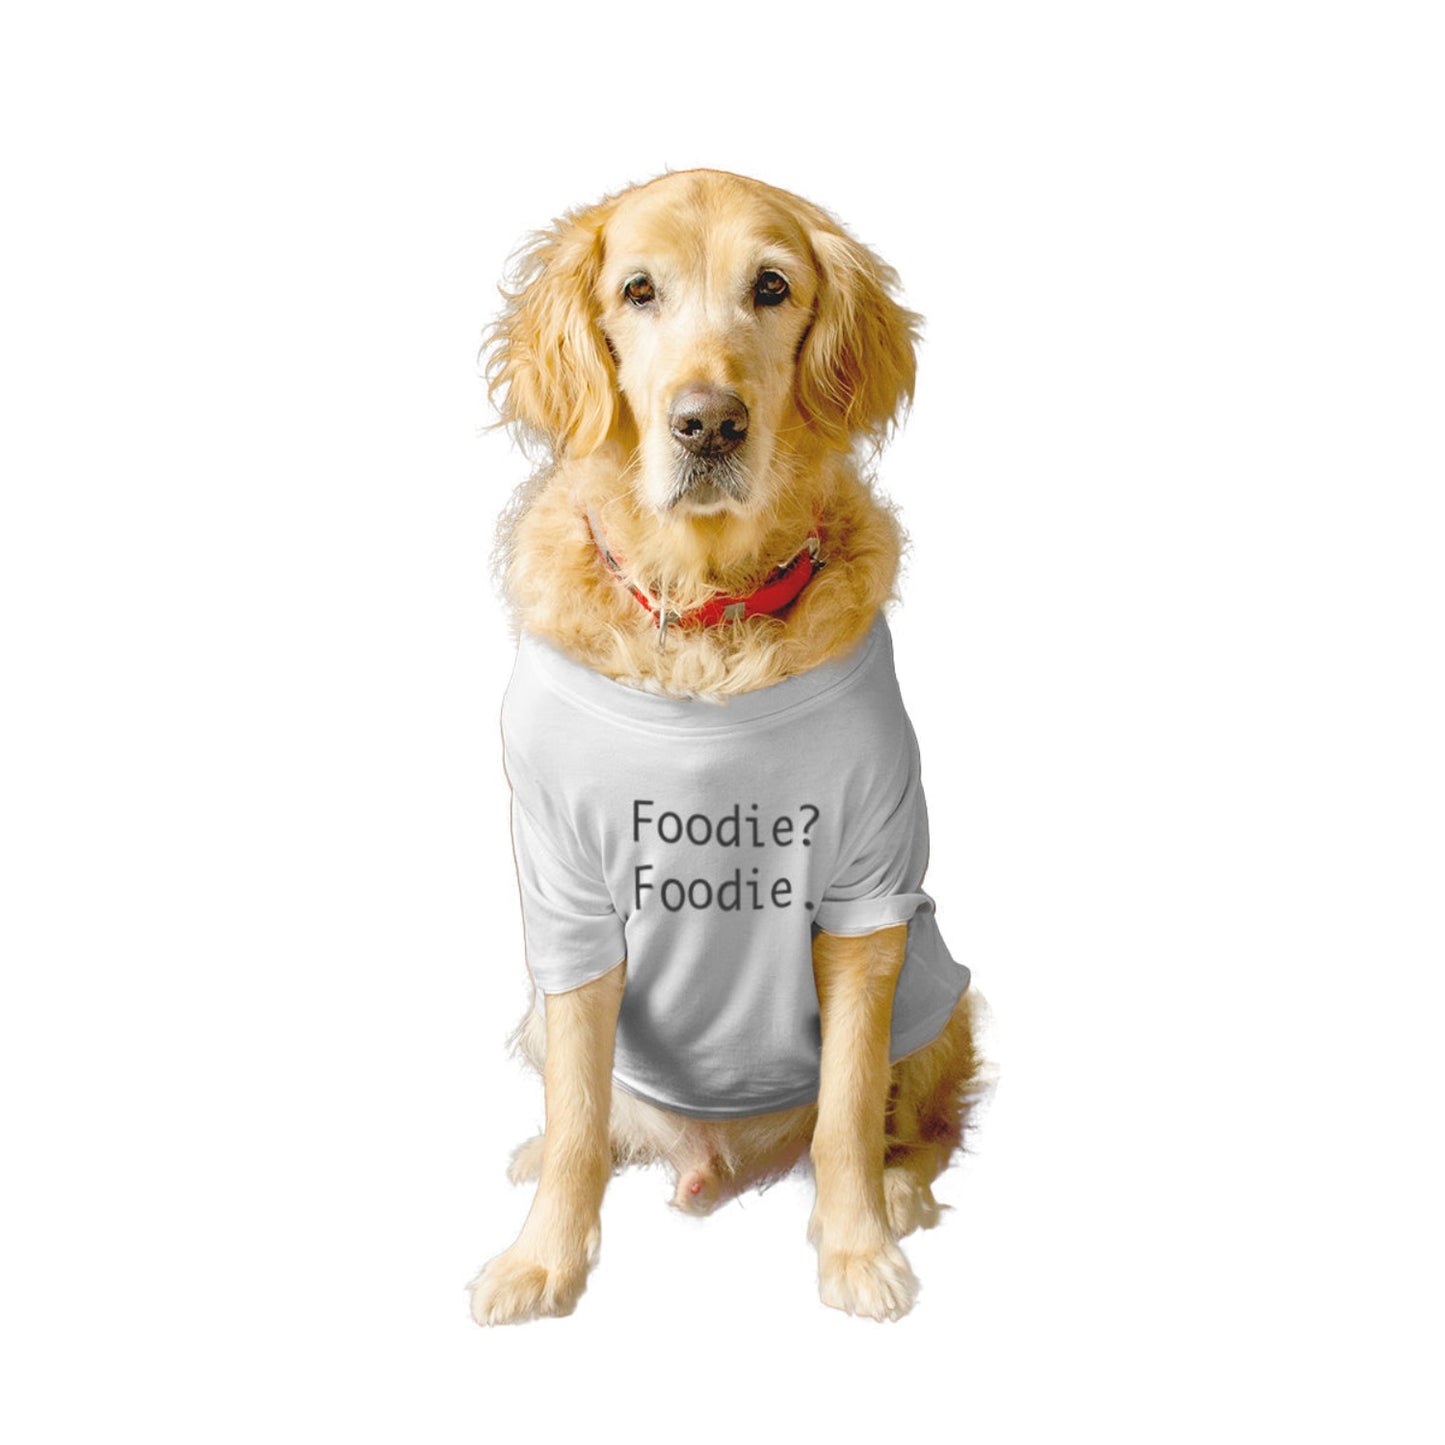 Ruse XX-Small (Chihuahuas, Papillons) / White Ruse Basic Crew Neck "FOODIE? FOODIE." Printed Half Sleeves Dog Tee